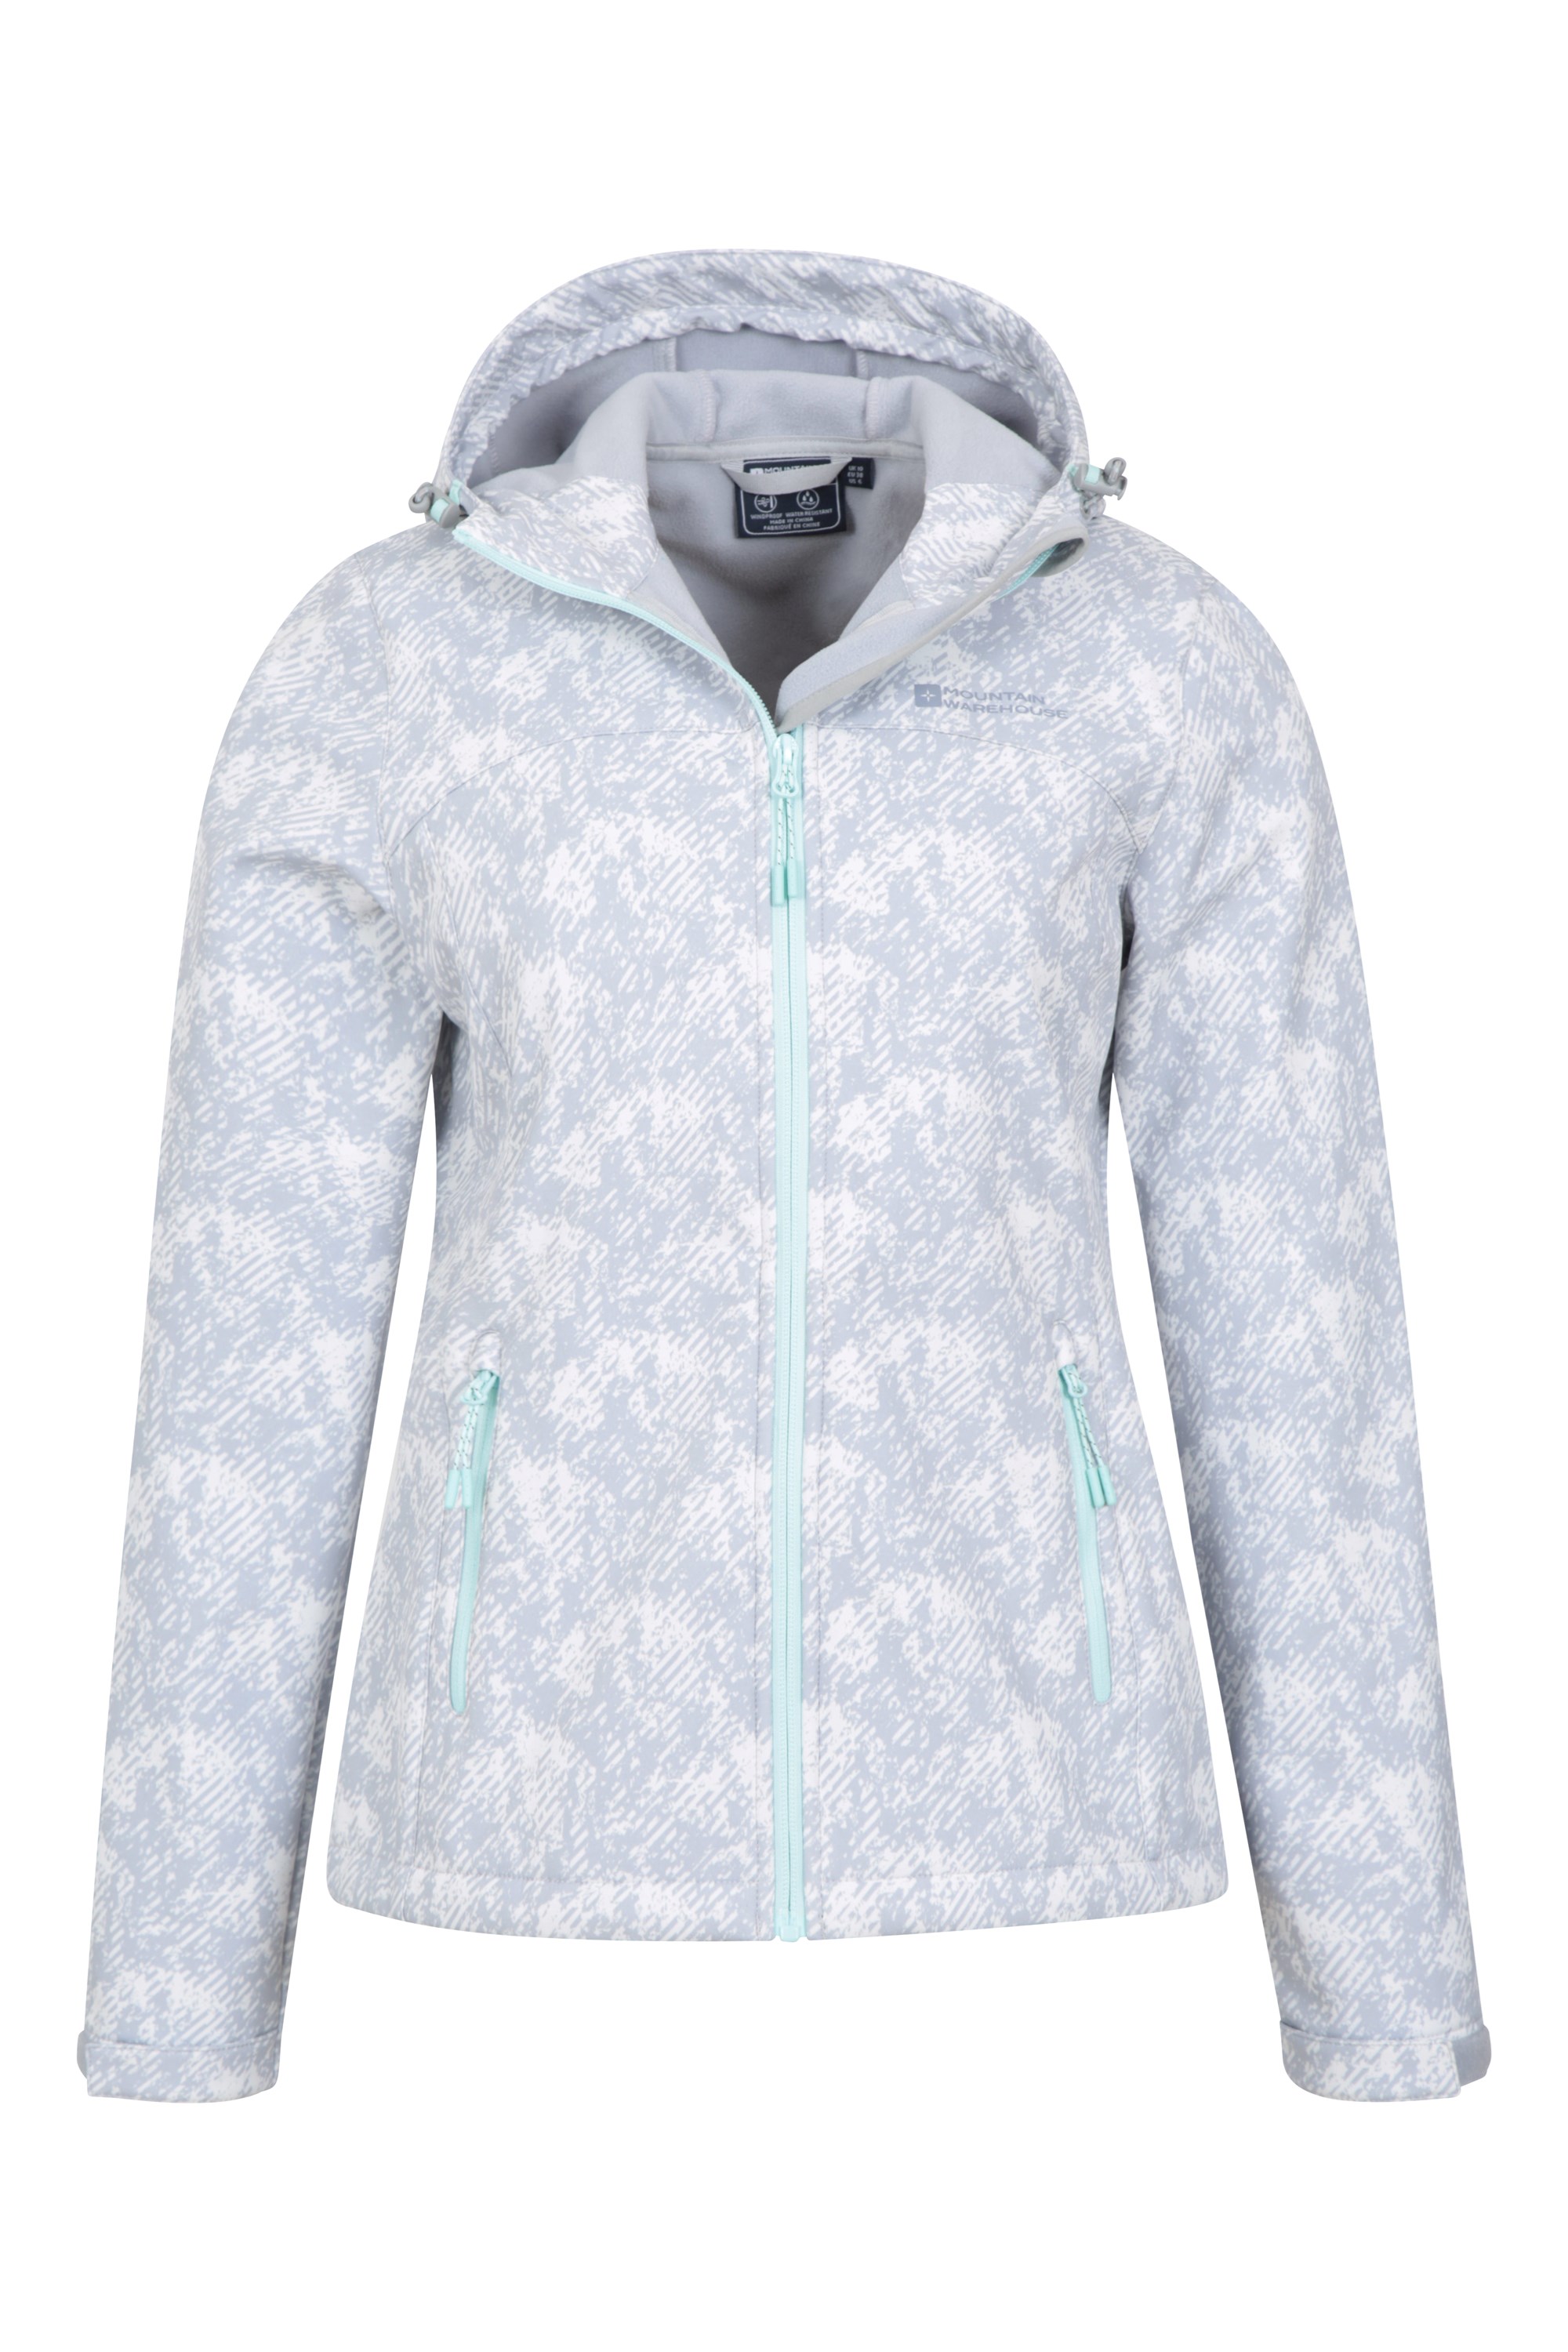 Exodus Womens Printed Water Resistant Softshell | Mountain Warehouse US